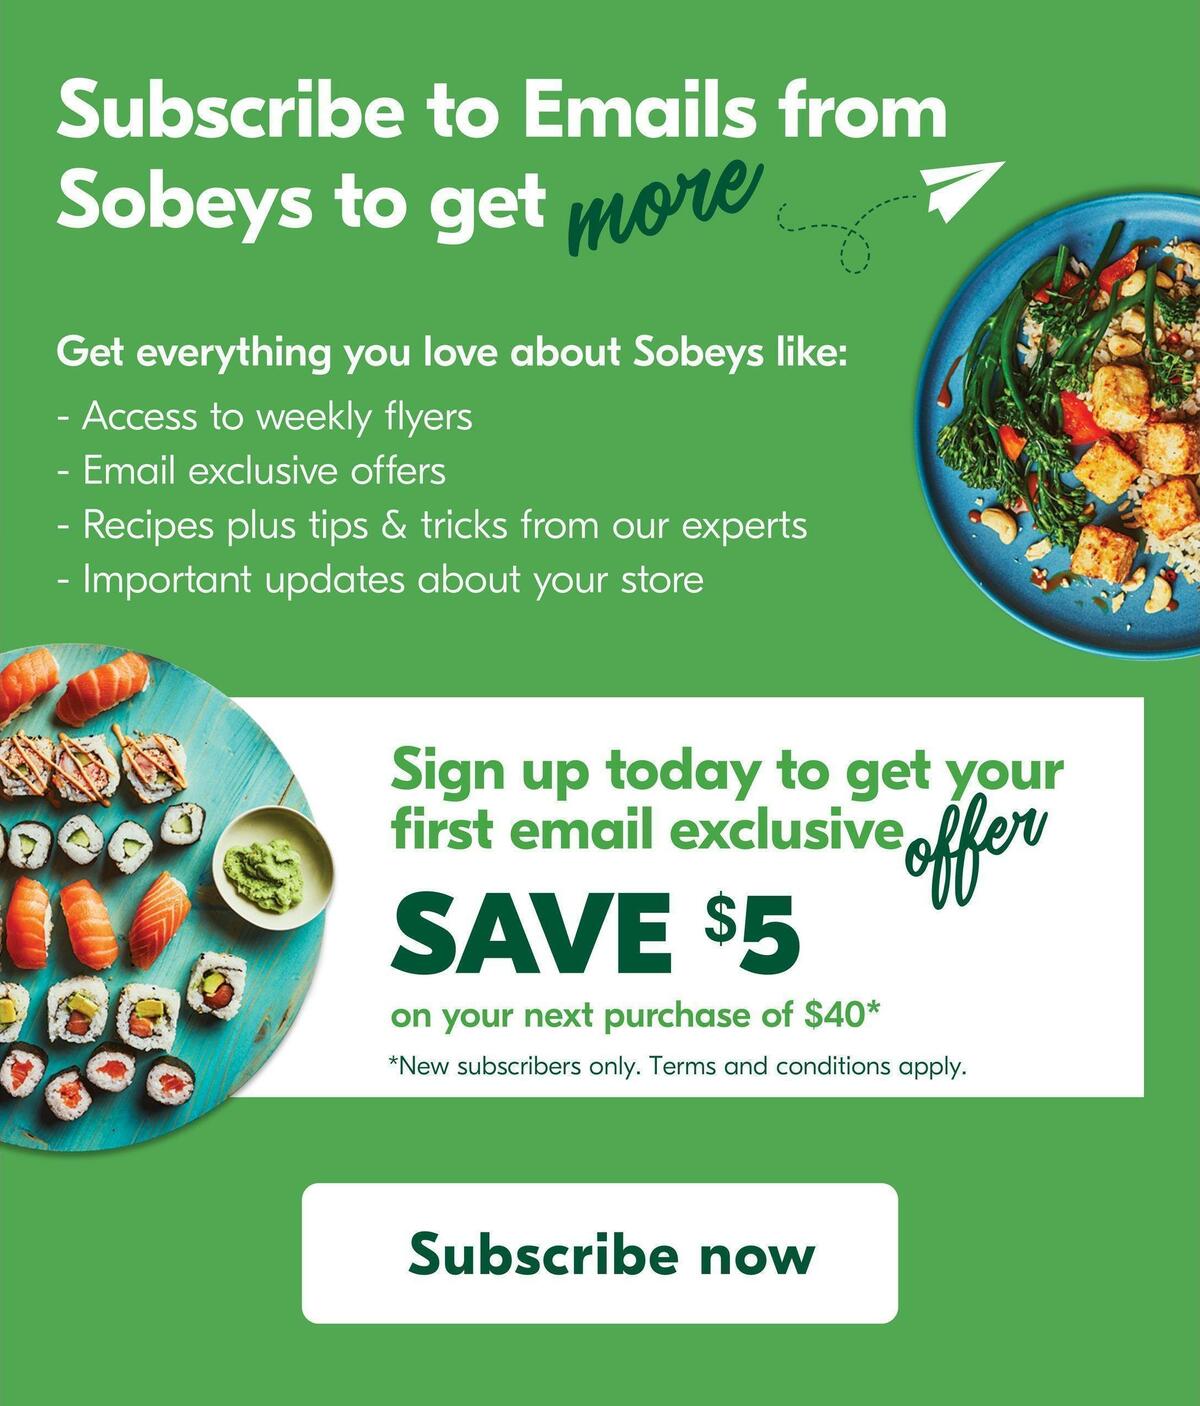 Sobeys Flyer from May 25